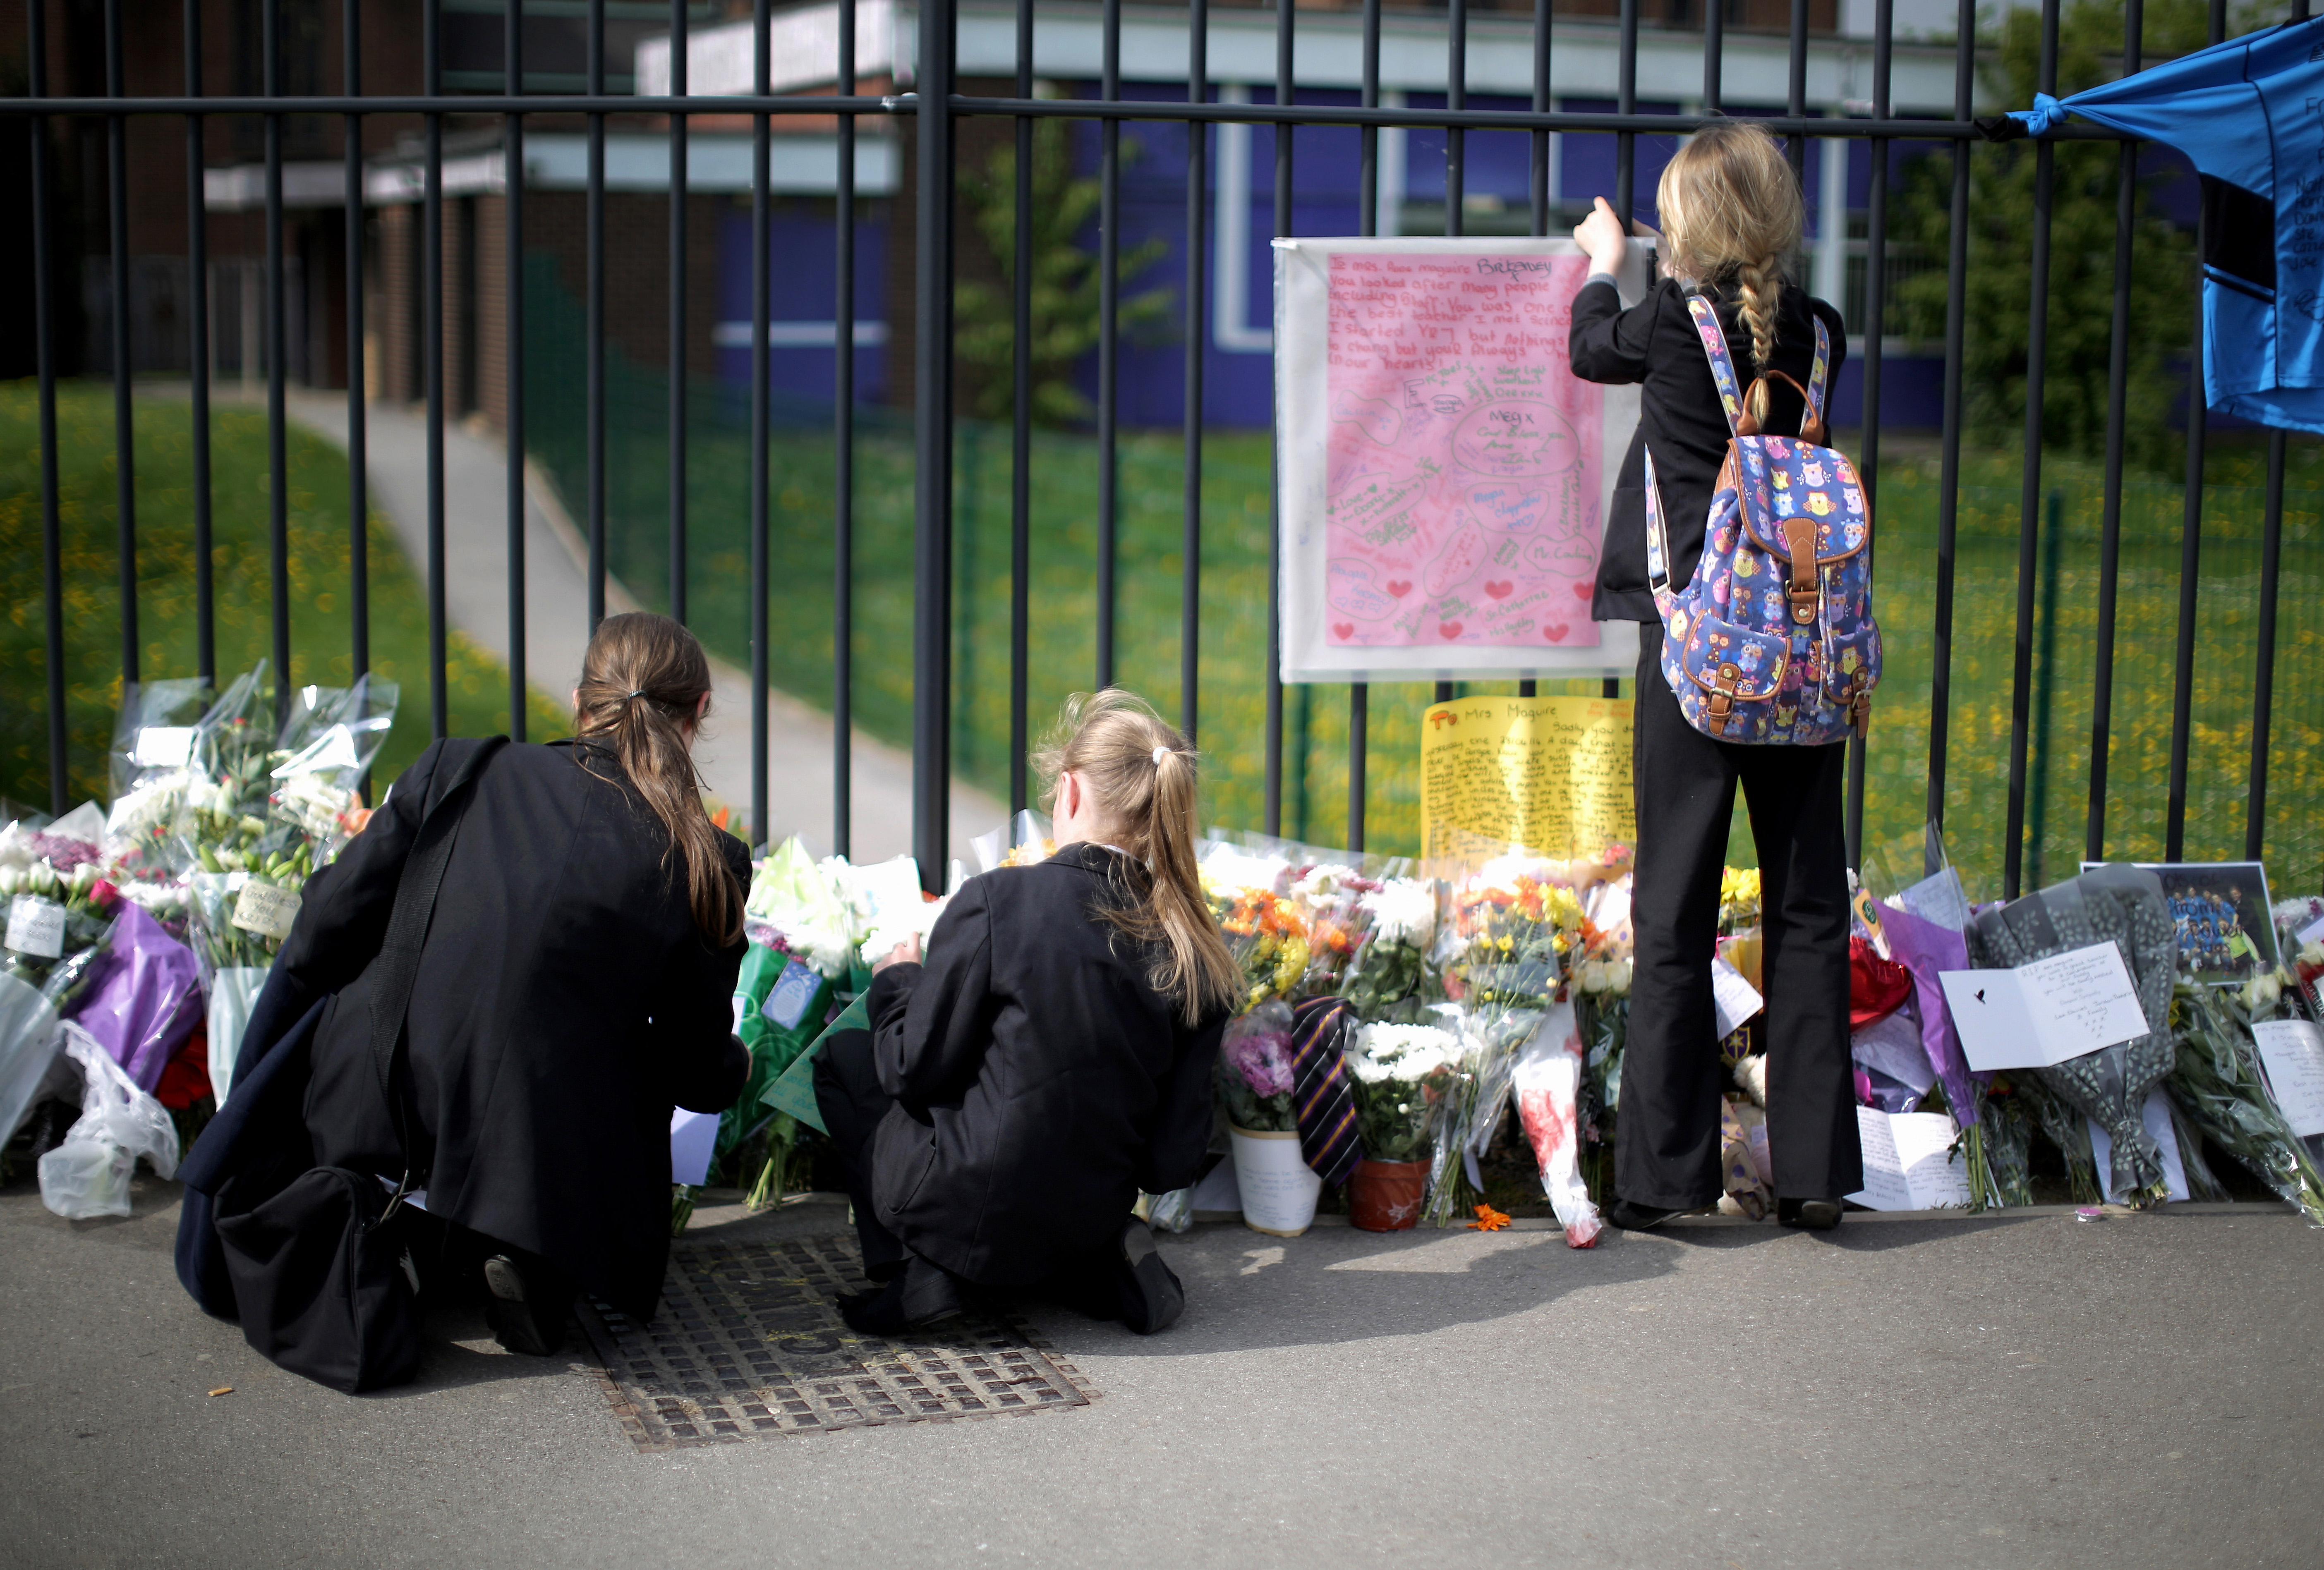 Tributes to stabbed Leeds teacher Ann Maguire